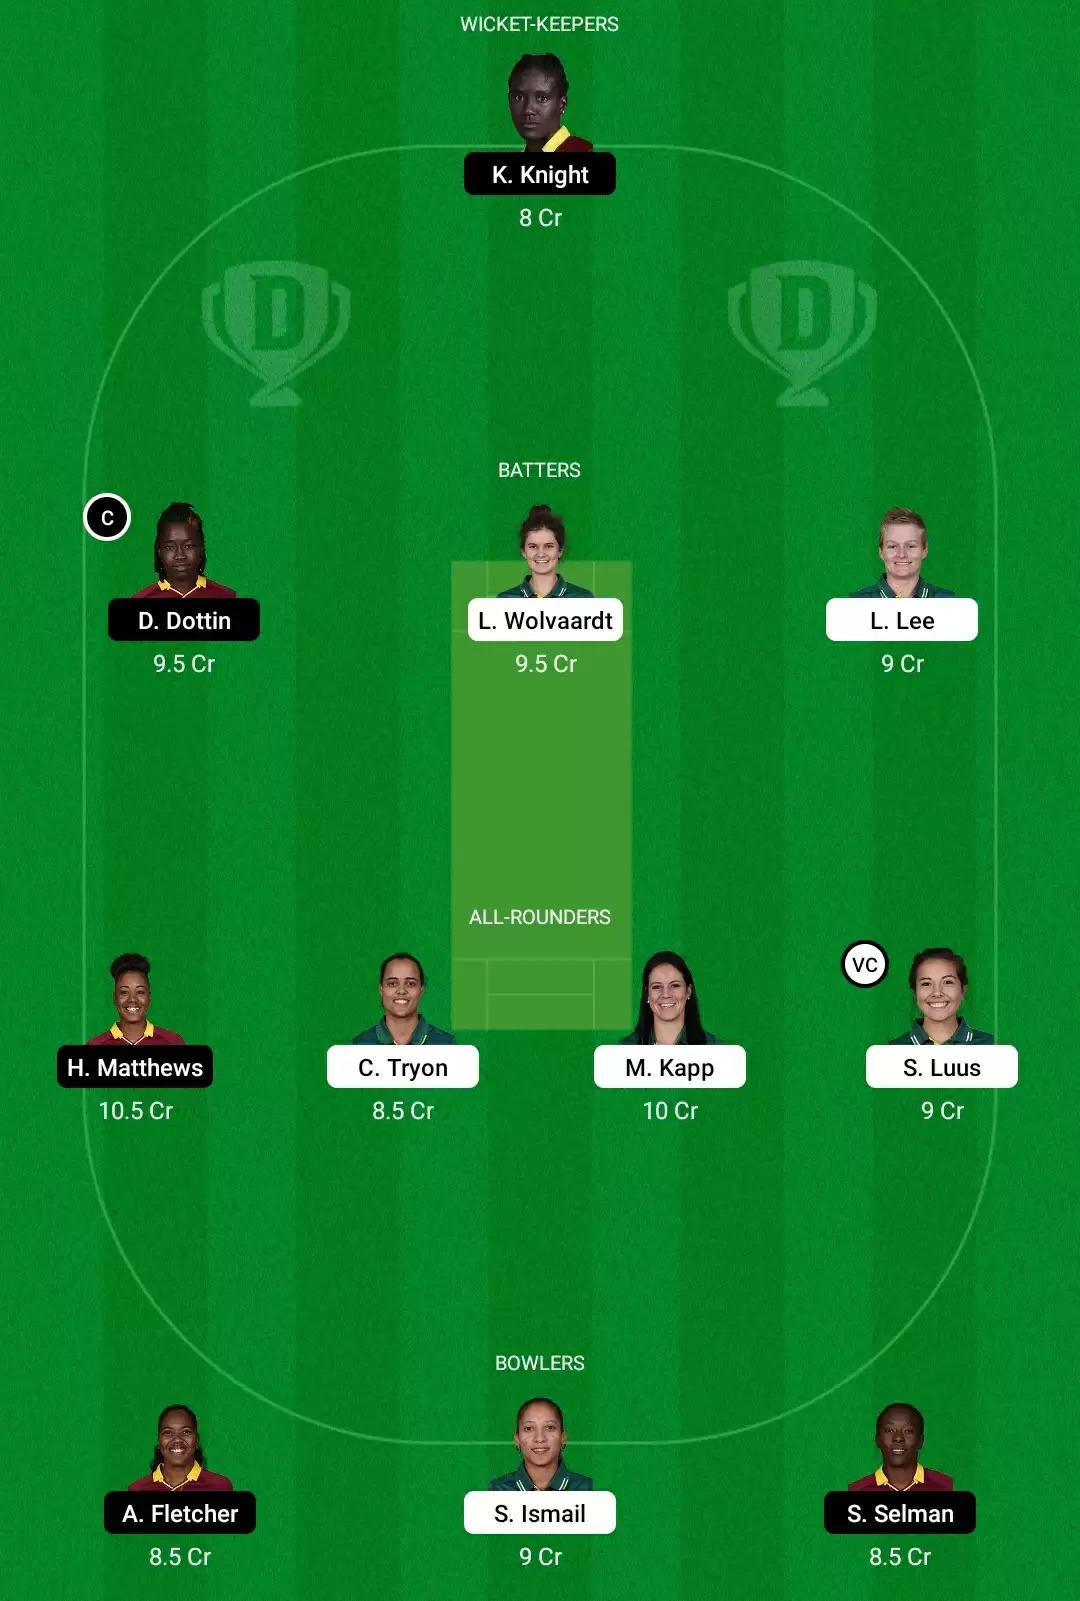 SA-W vs WI-W Dream11 Prediction, Fantasy Cricket Tips, Playing XI, Dream11 Team, Pitch And Weather Report – South Africa Women Vs West Indies Women Match, ICC Women’s World Cup 2022